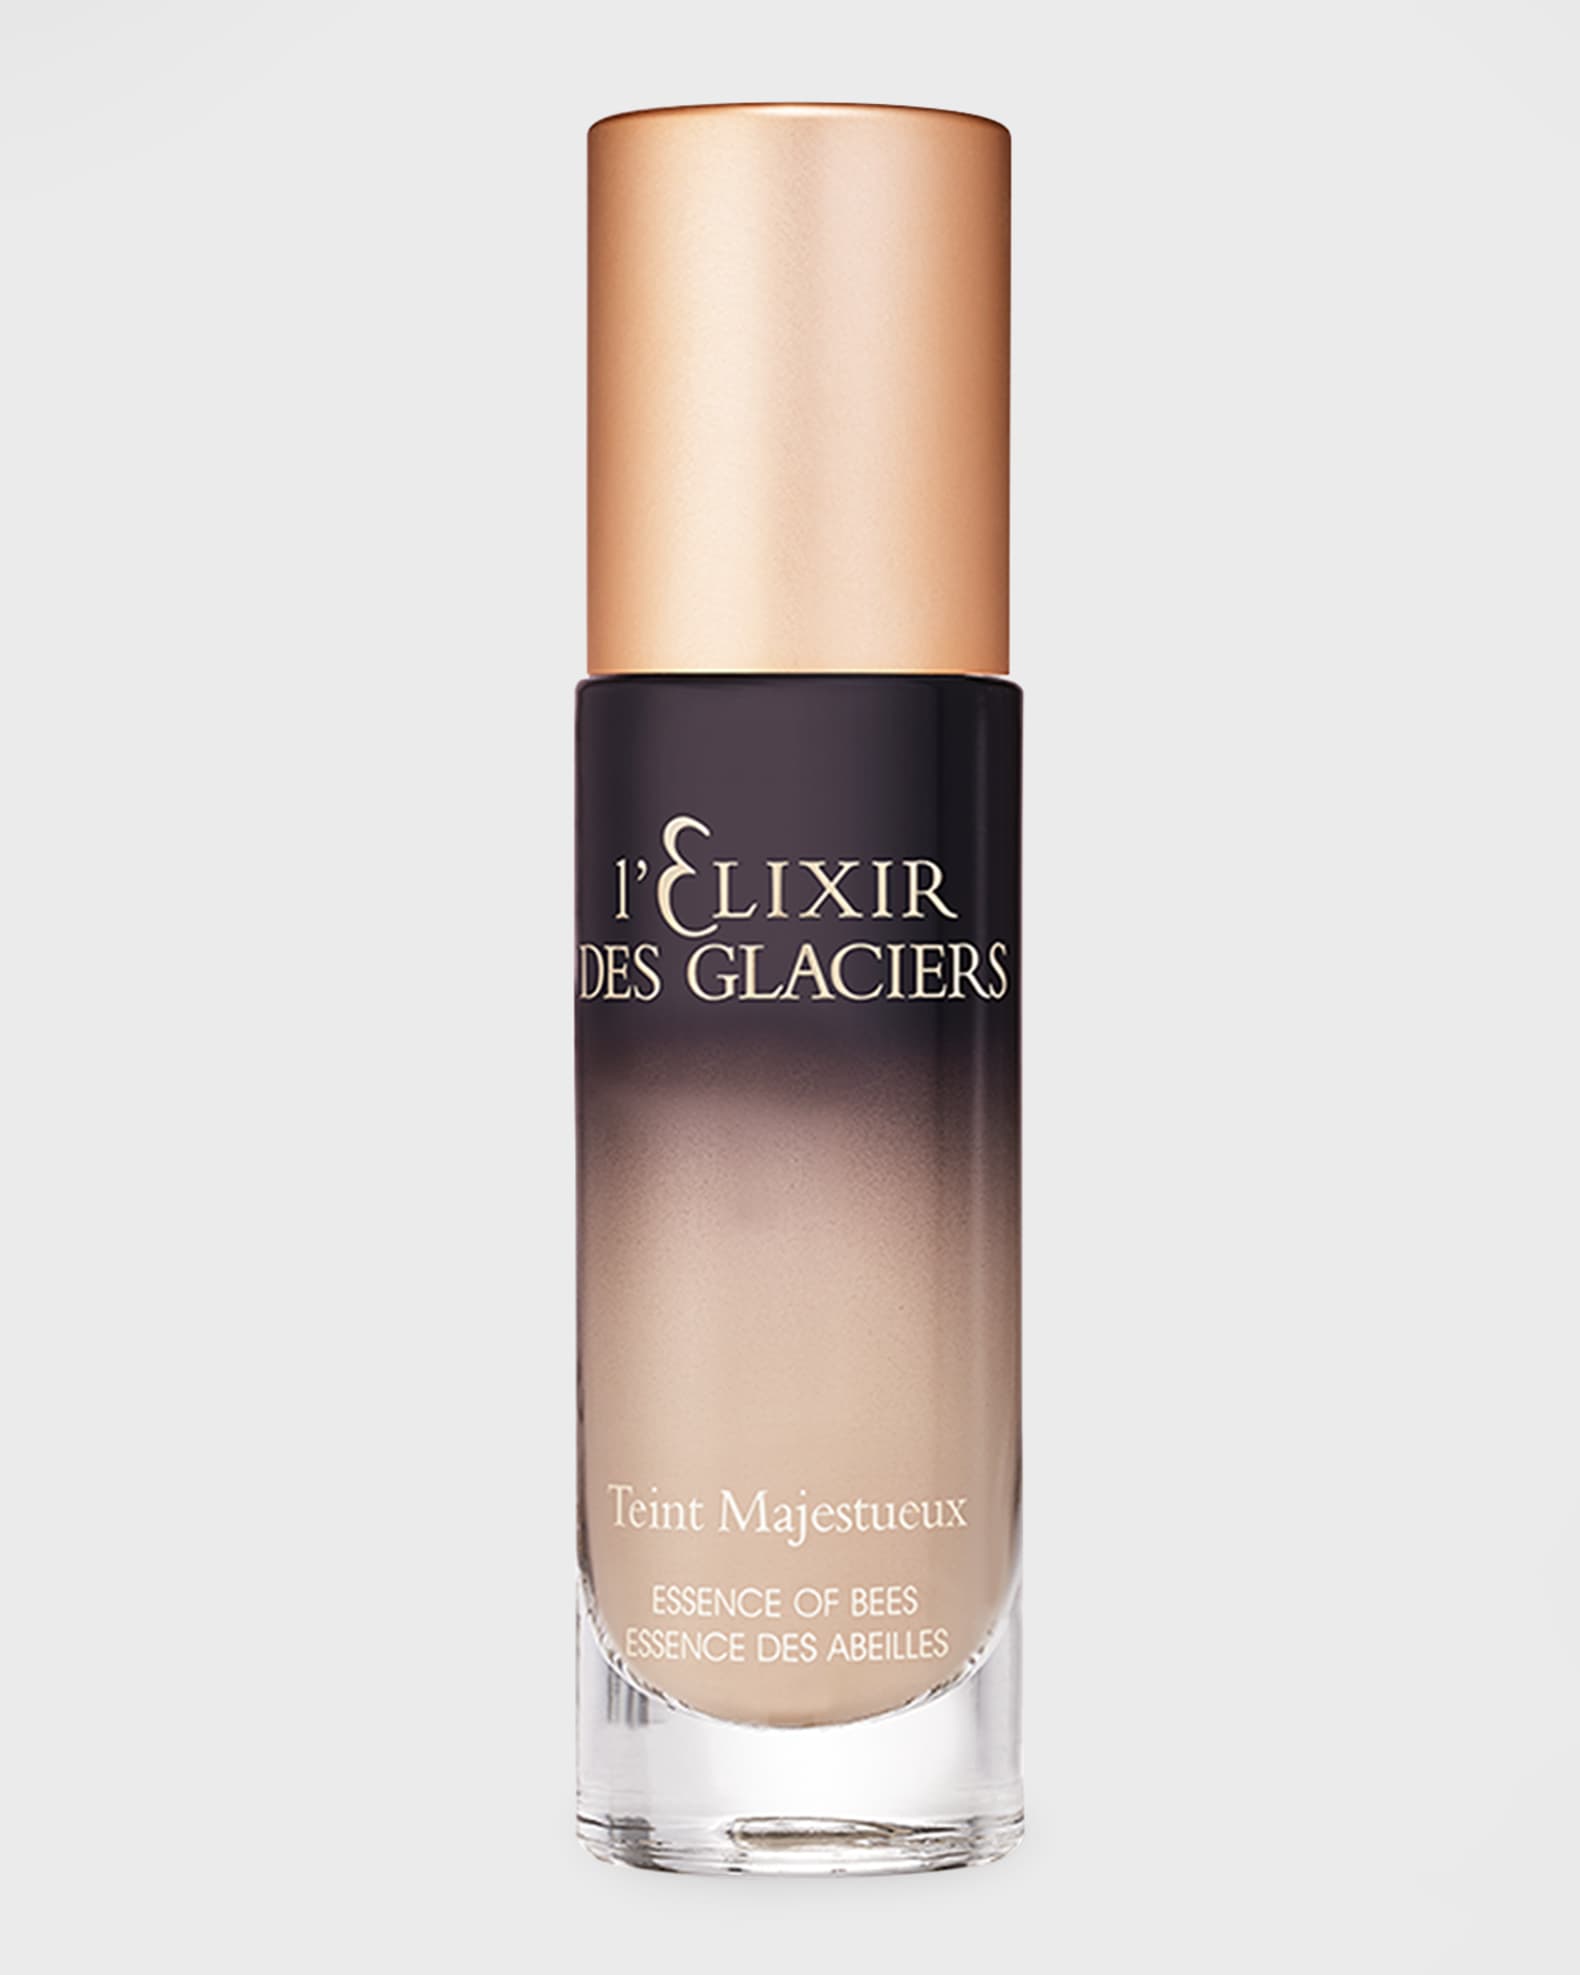 Most Expensive Foundations: Valmont Teint Majestueux Porcelaine in Kyoto Satin Glow Foundation